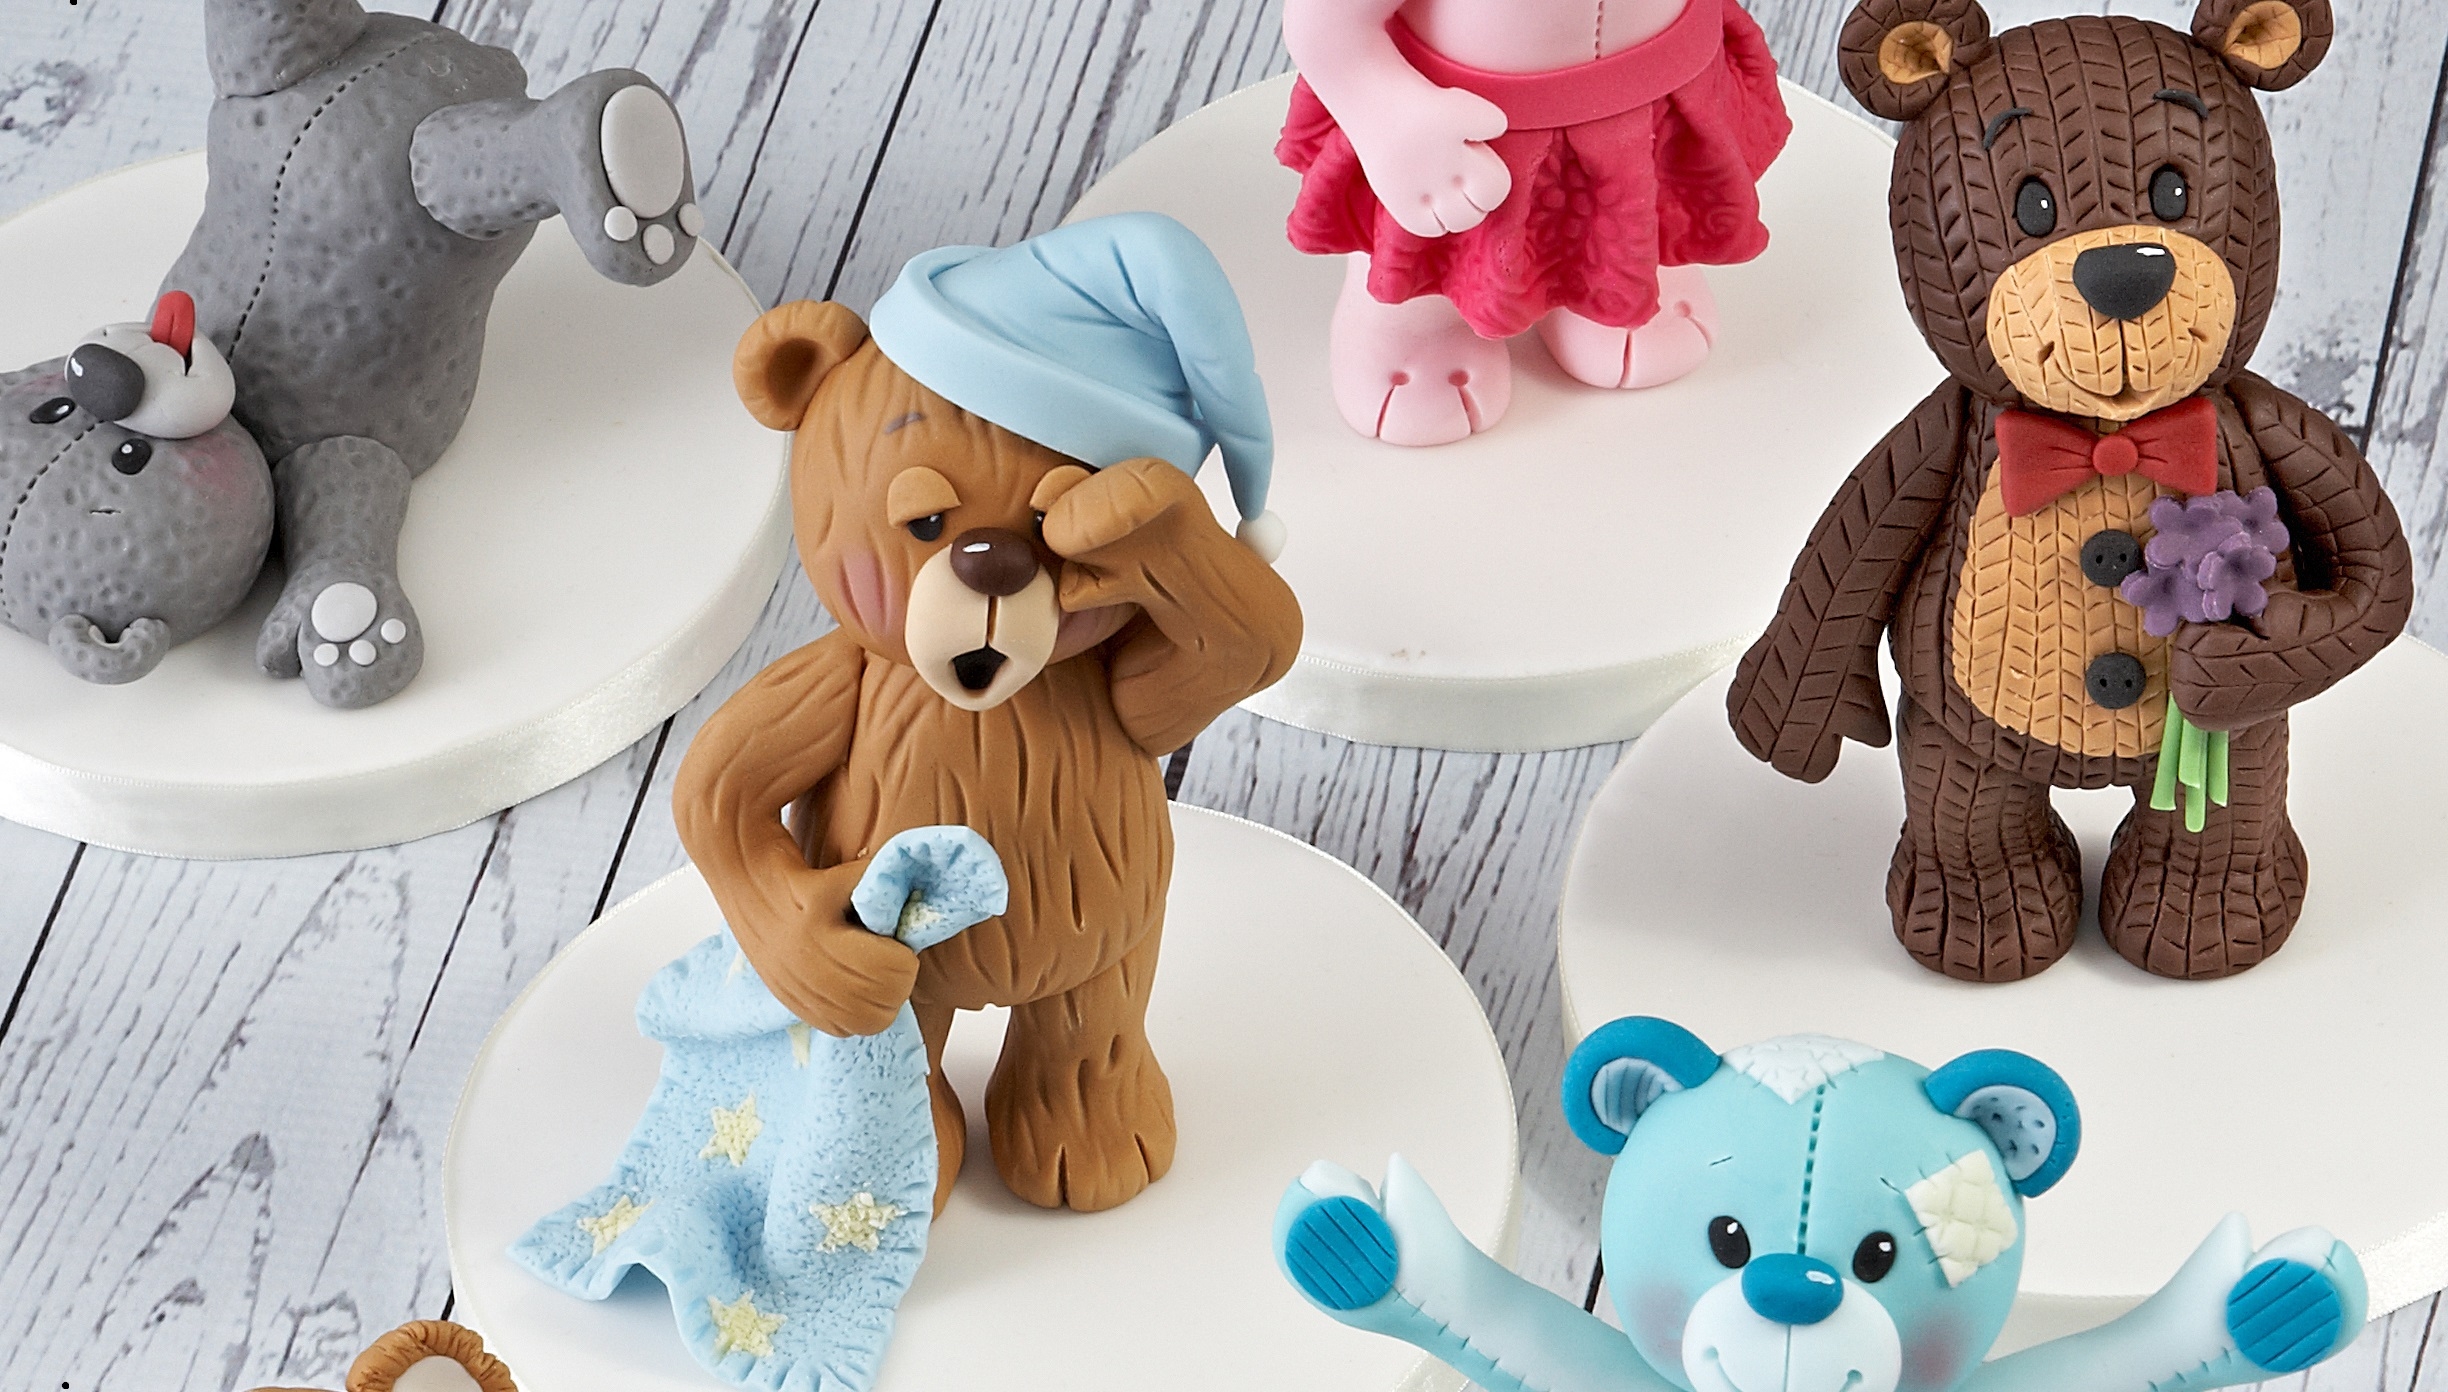 Meet the Renshaw Ready to Roll Icing Bears